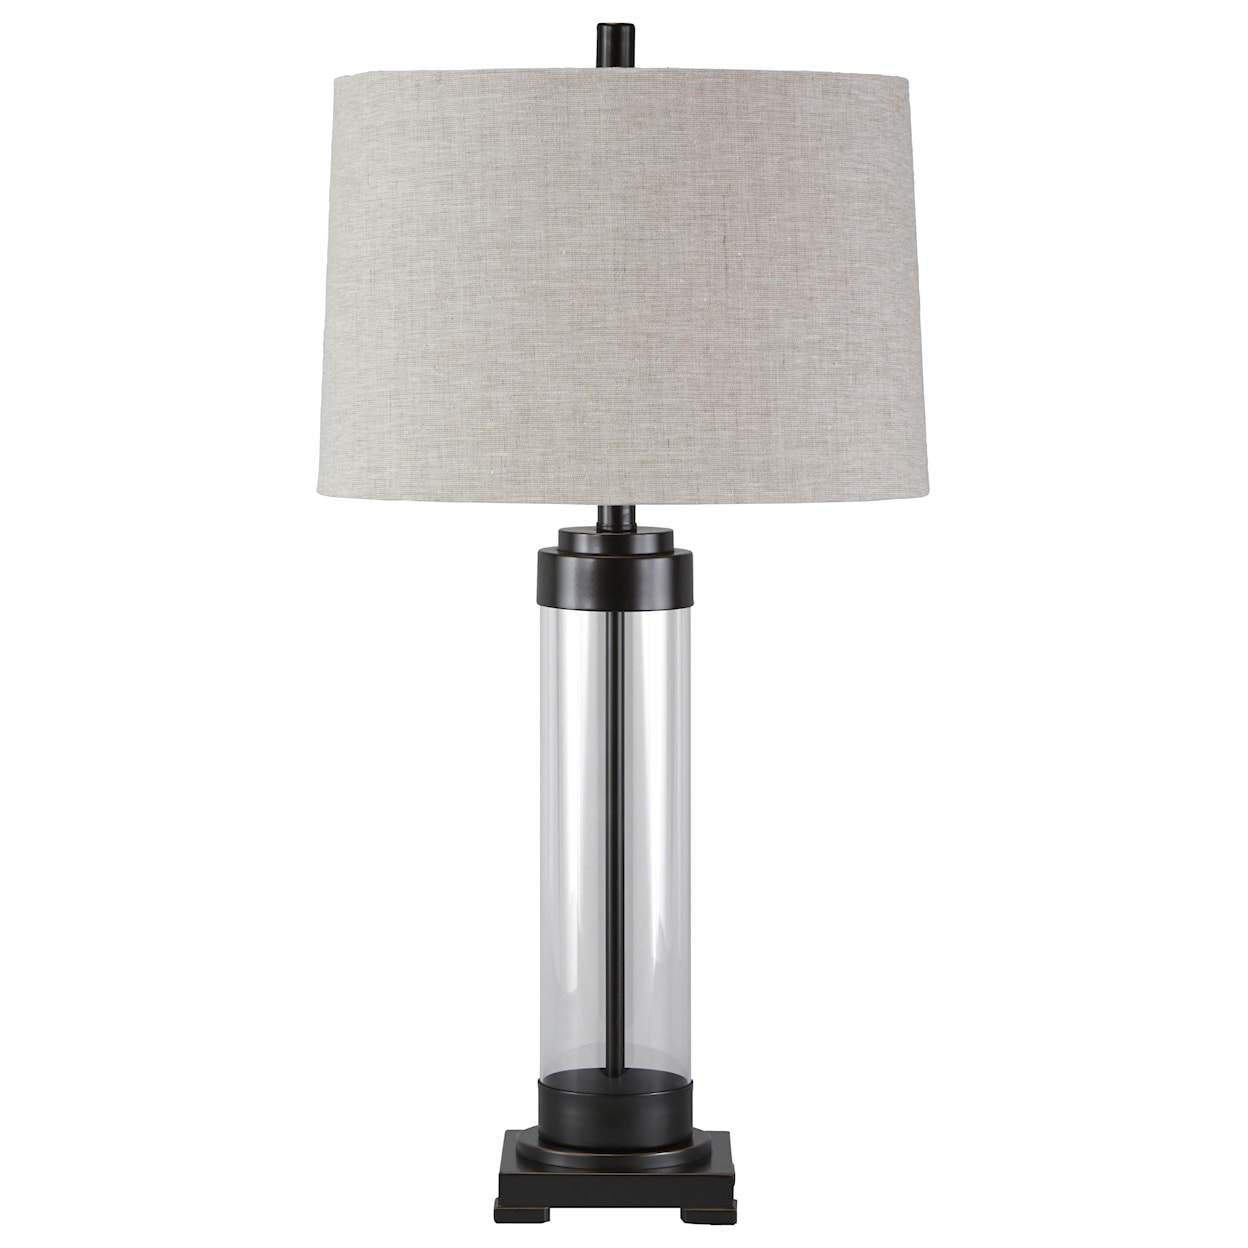 Signature Design by Ashley Lamps - Vintage Style Talar Glass Table Lamp